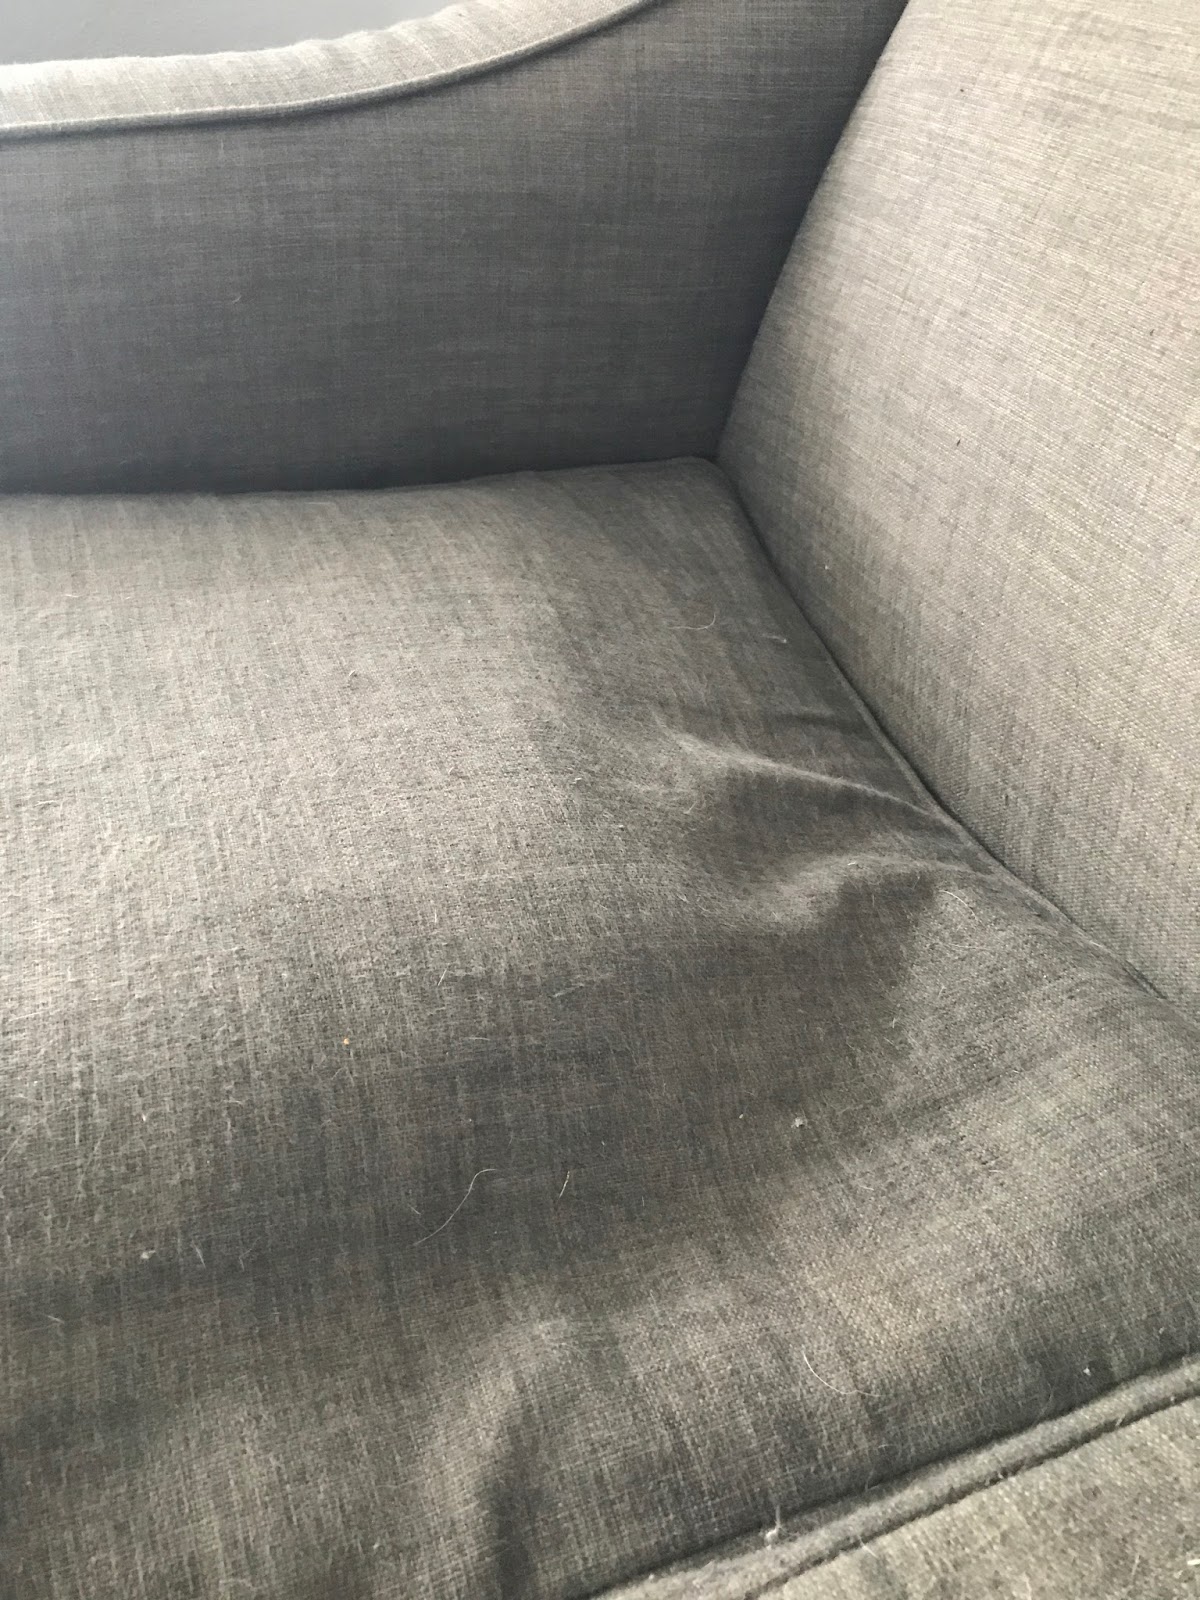 How to Replace Couch Cushion Foam